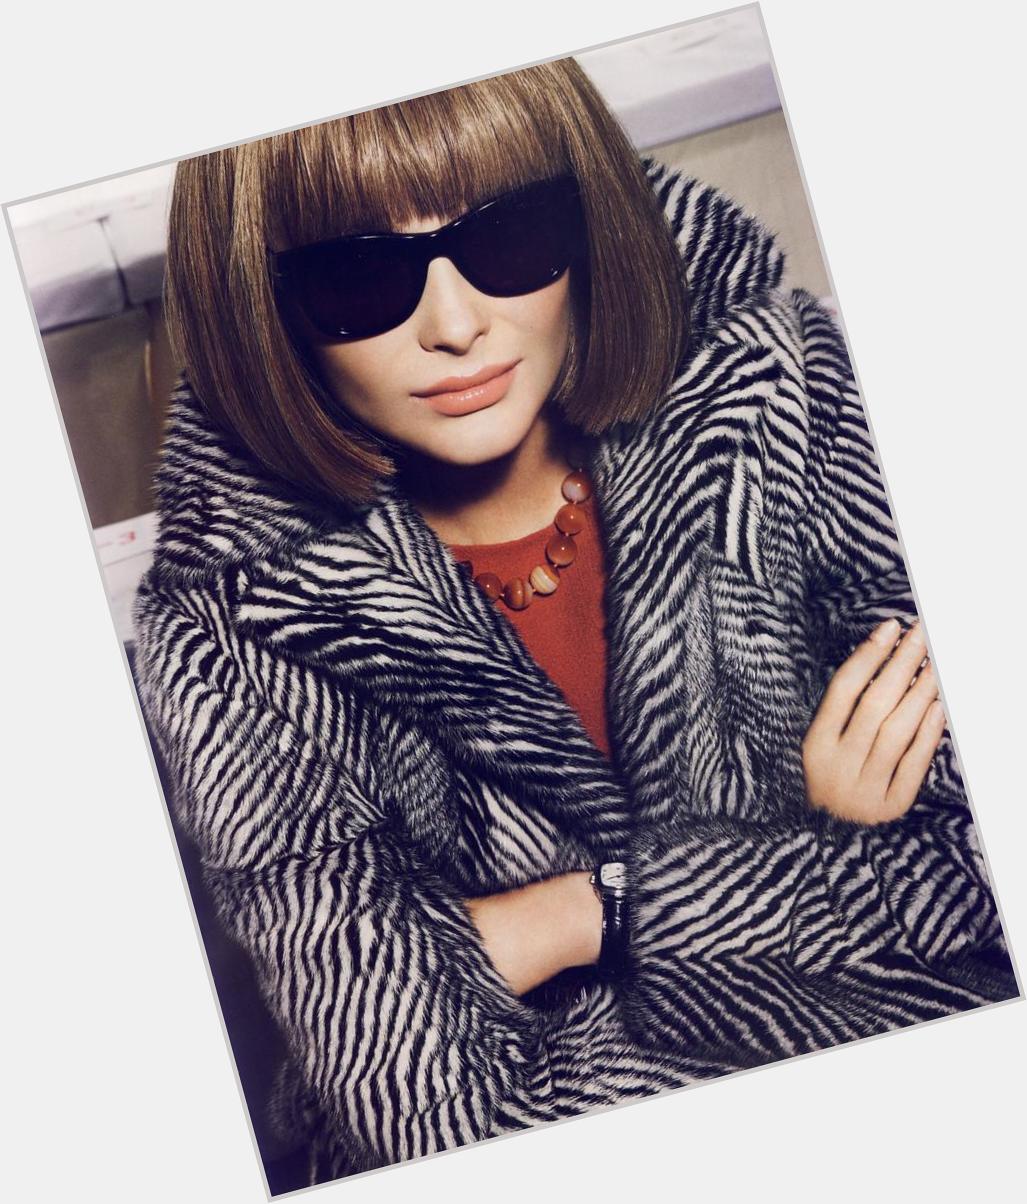 Happy Birthday to the Queen of Fashion! We love you Anna Wintour! 